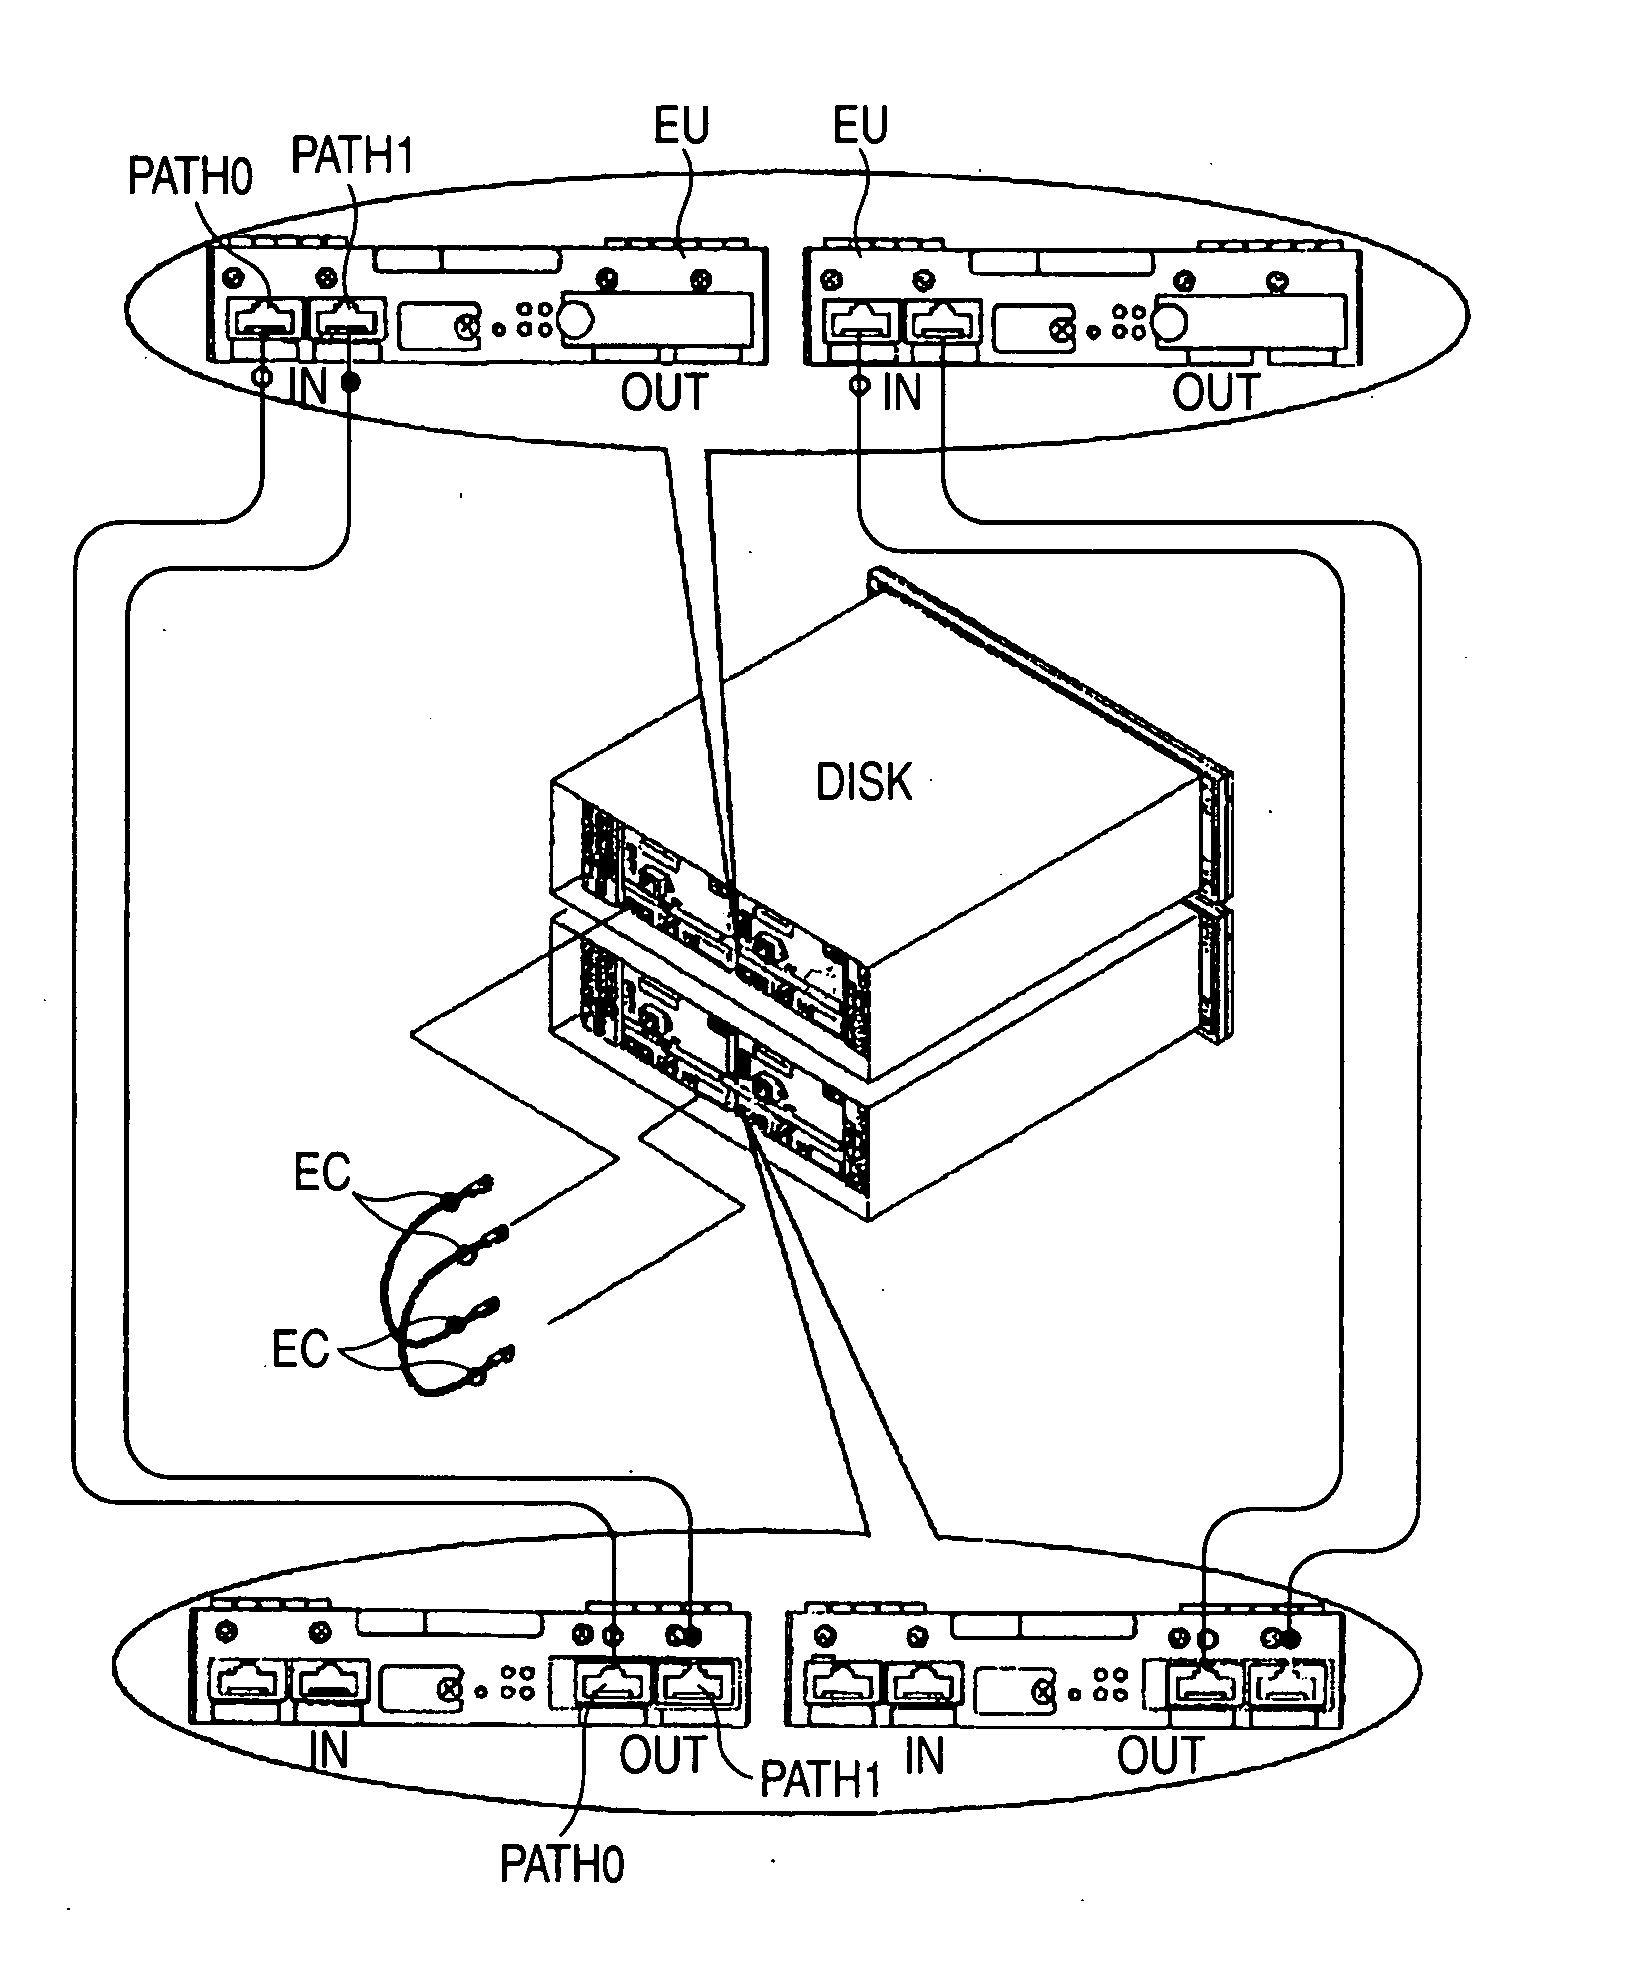 Connection support method for disk array device